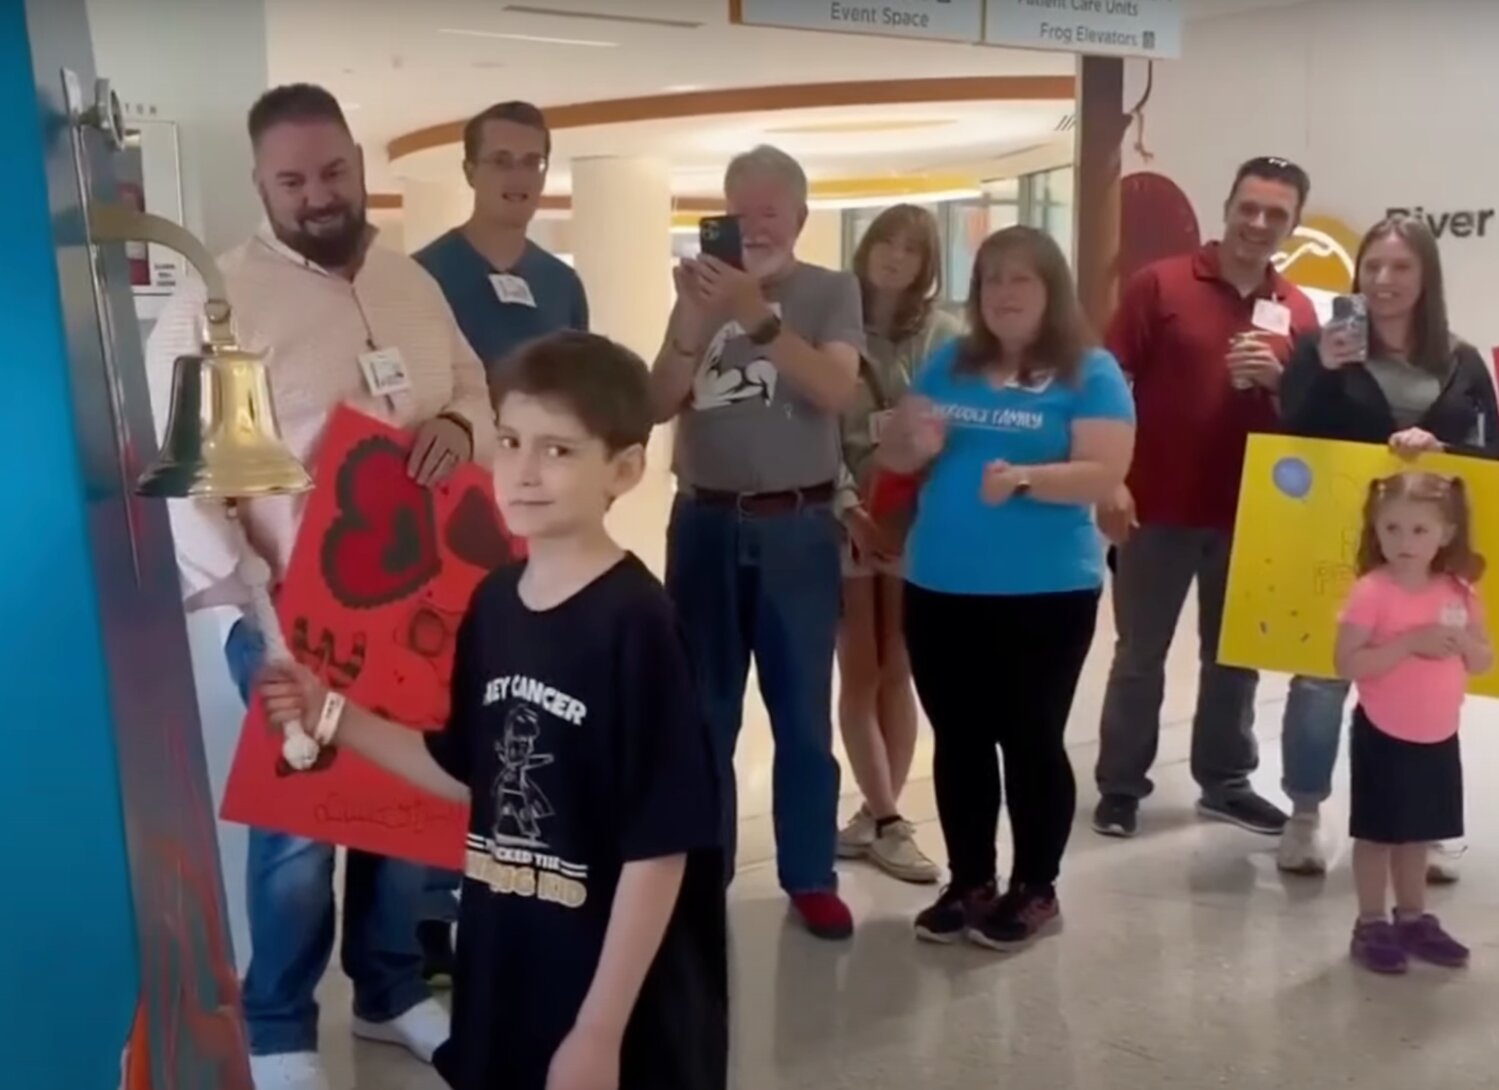 After 30 radiation doses, 44 chemo infusions, five surgeries, three blood transfusions, 51 inpatient hospital days, 87 outpatient appointments and seven trips to ER, Brayden VanderDoes, age 9, rings the bell at Seattle Children’s Hospital in August signaling the end of more than a year of treatment for a brain tumor.